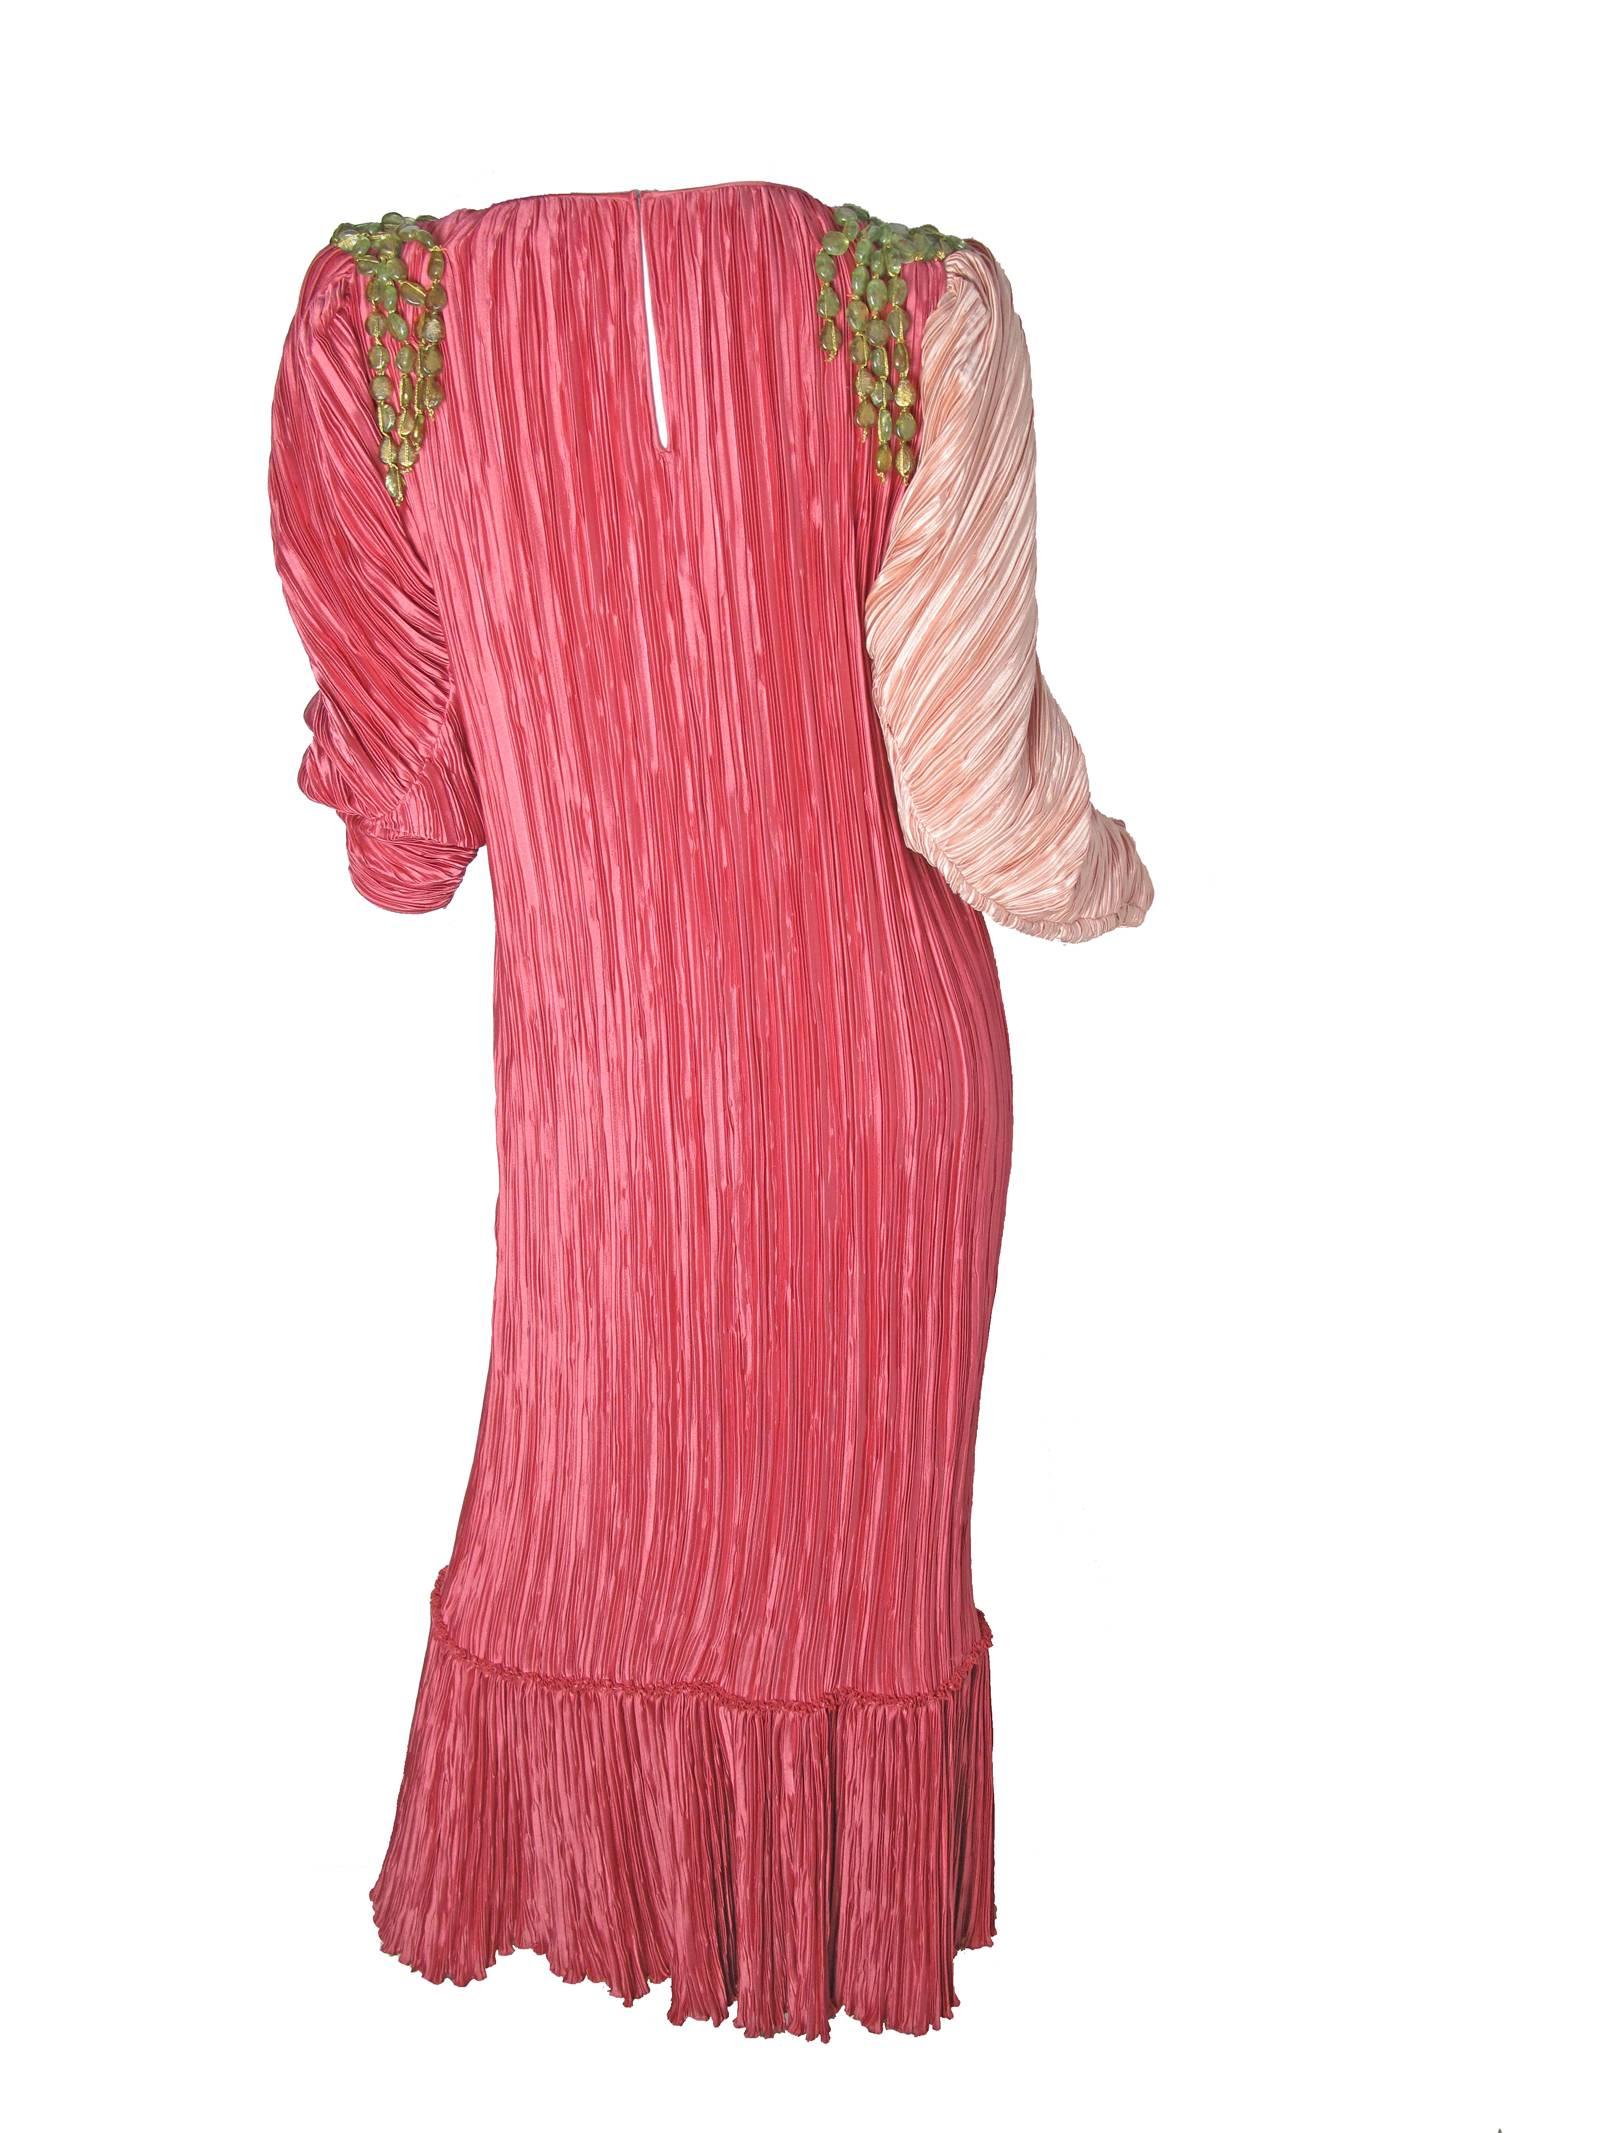 Mary McFadden pink pleated gown with green stones on shoulders.  Condition: Excellent. Size Large

42